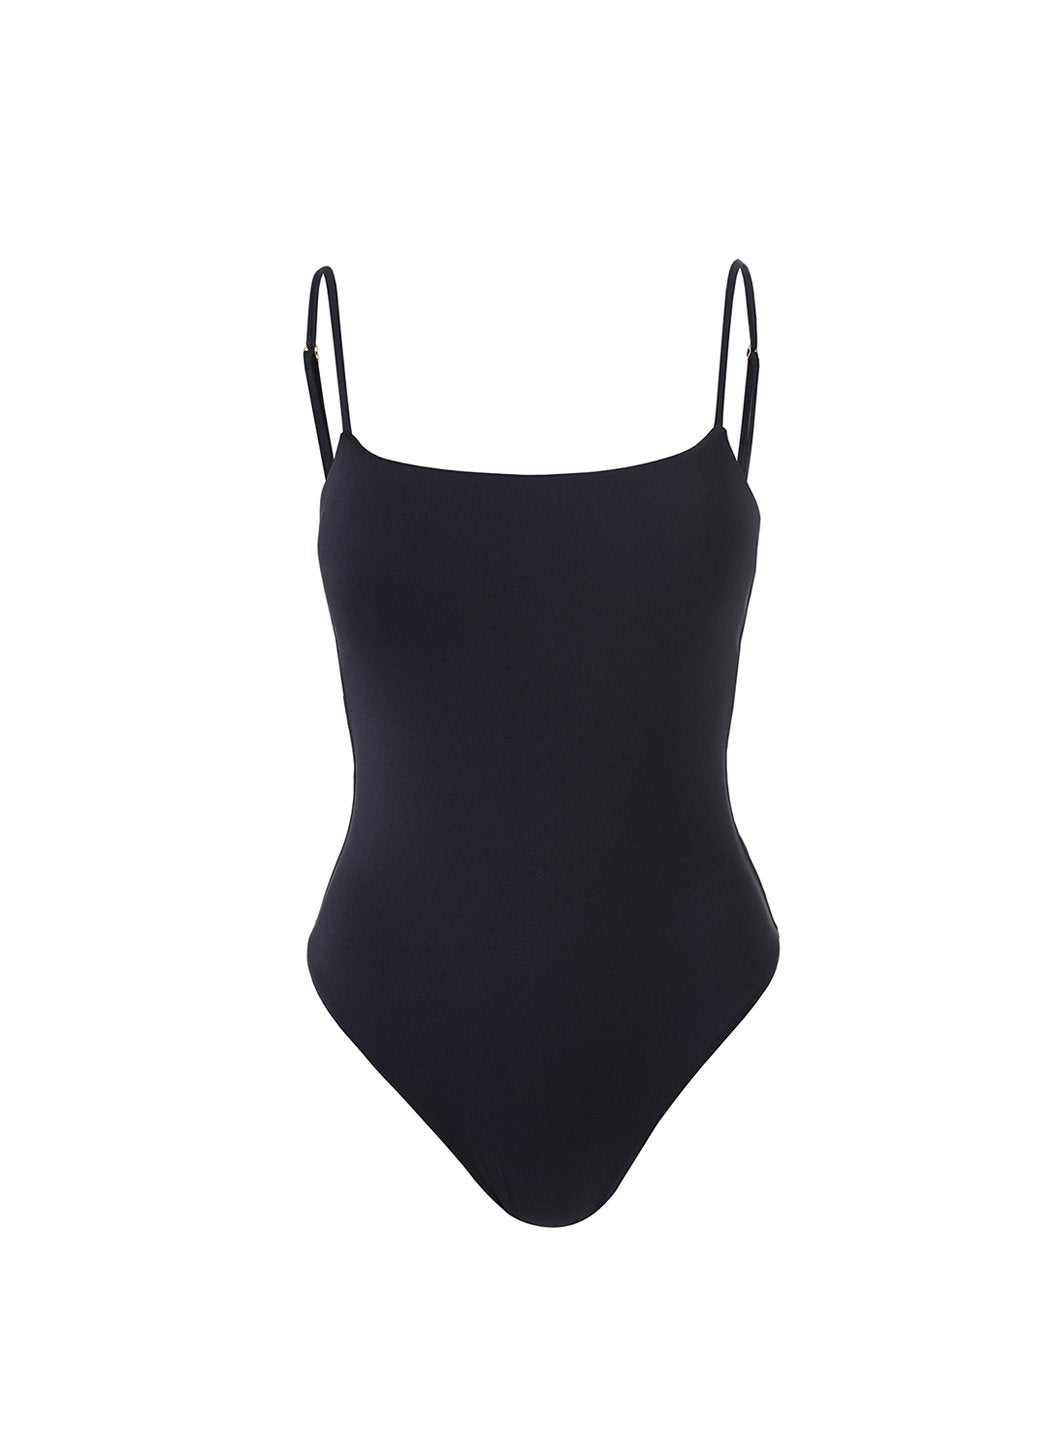 Melissa Odabash One Piece Swimsuits | Official Website & Page 2